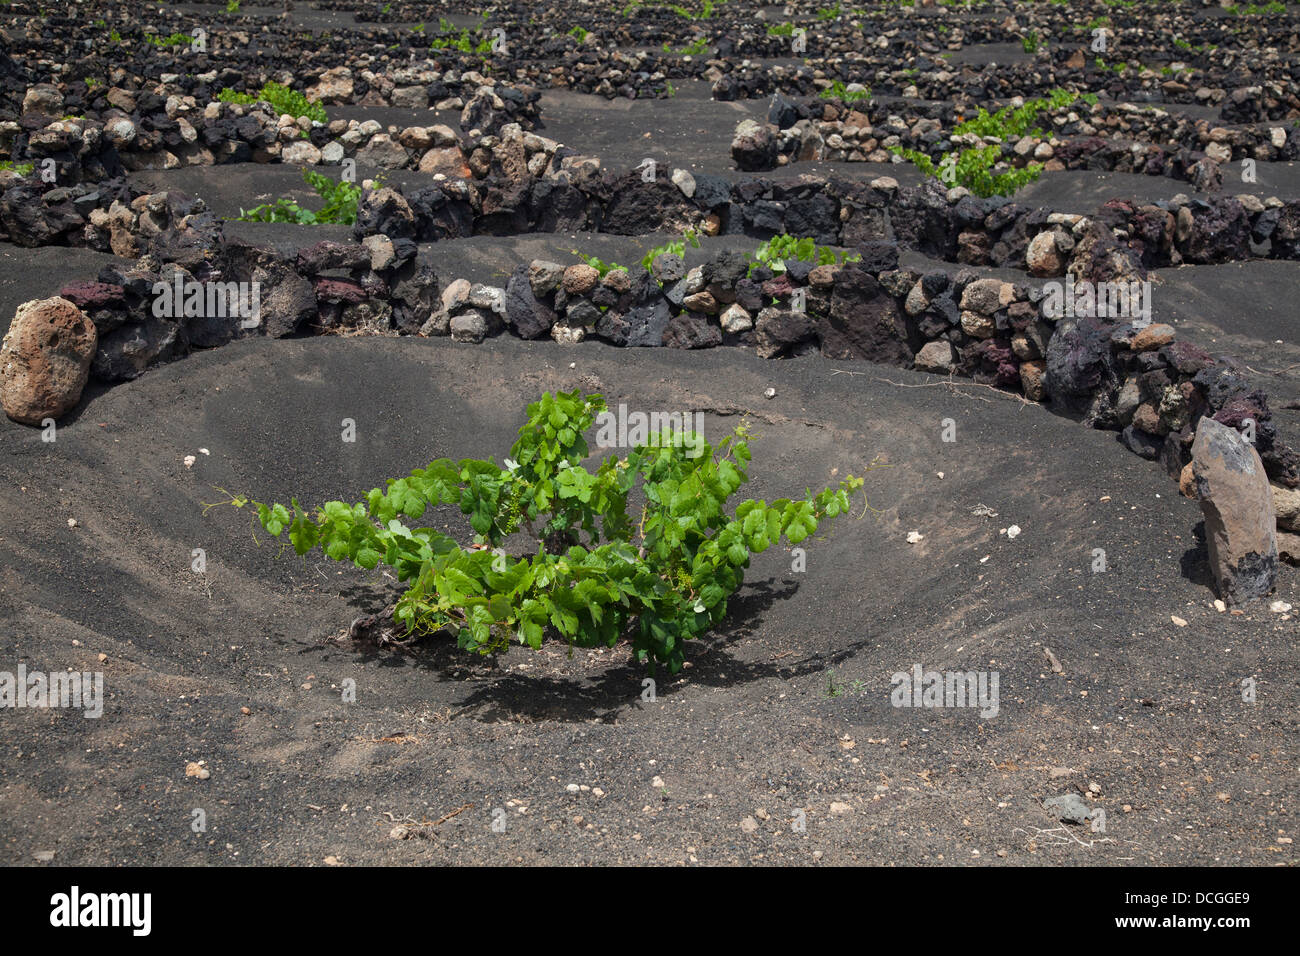 Vines growing in volcanic landscape of Lanzarote.  The low, curved walls are traditionally used to protect the vines from the wind. Stock Photo